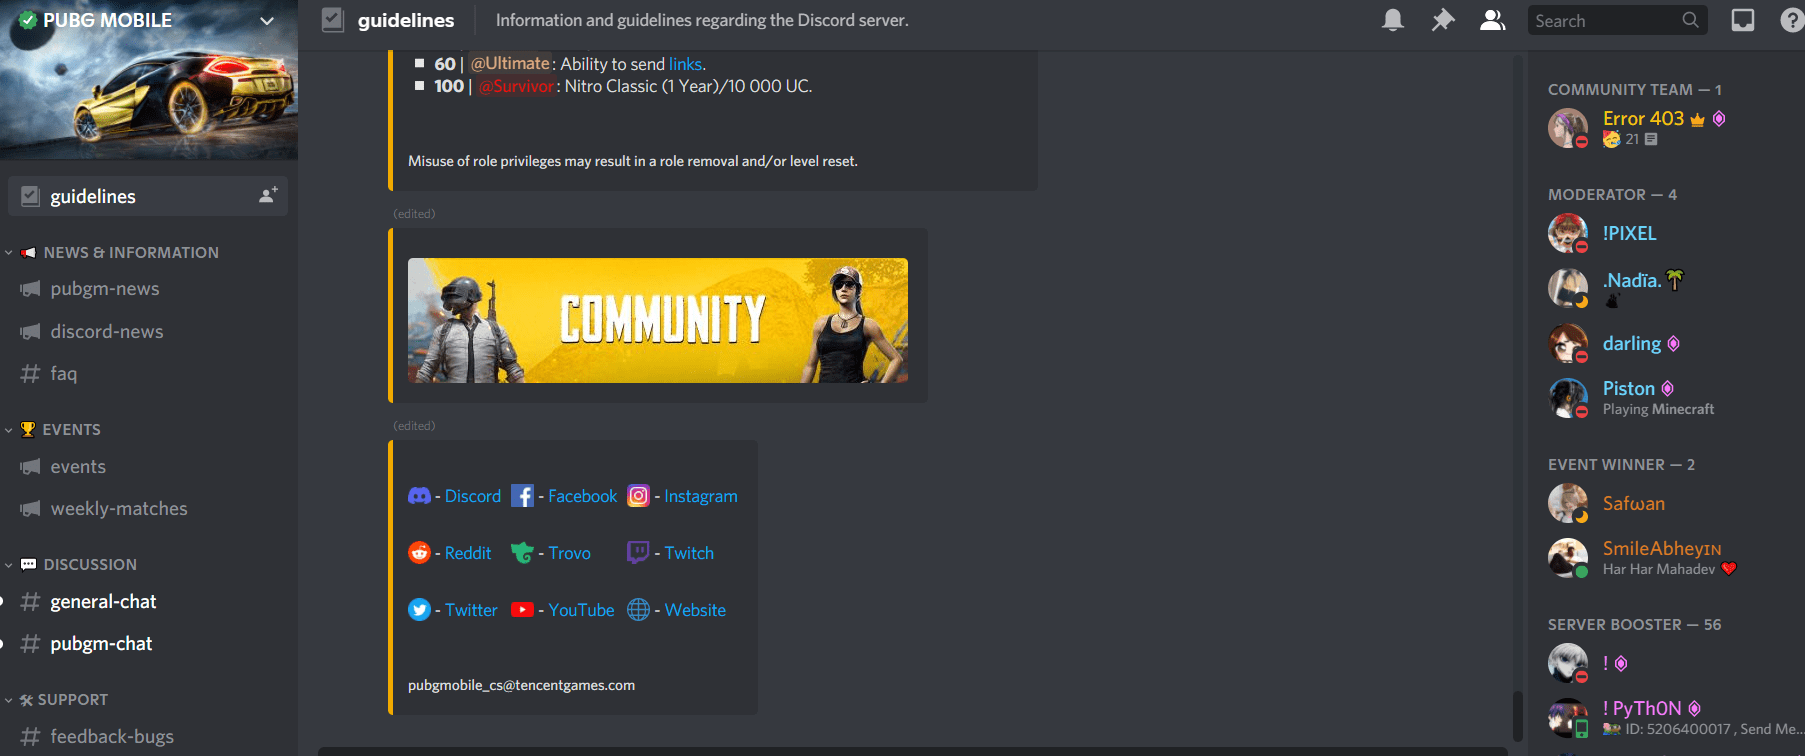 A Discord app interface showing the PUBG MOBILE community homepage